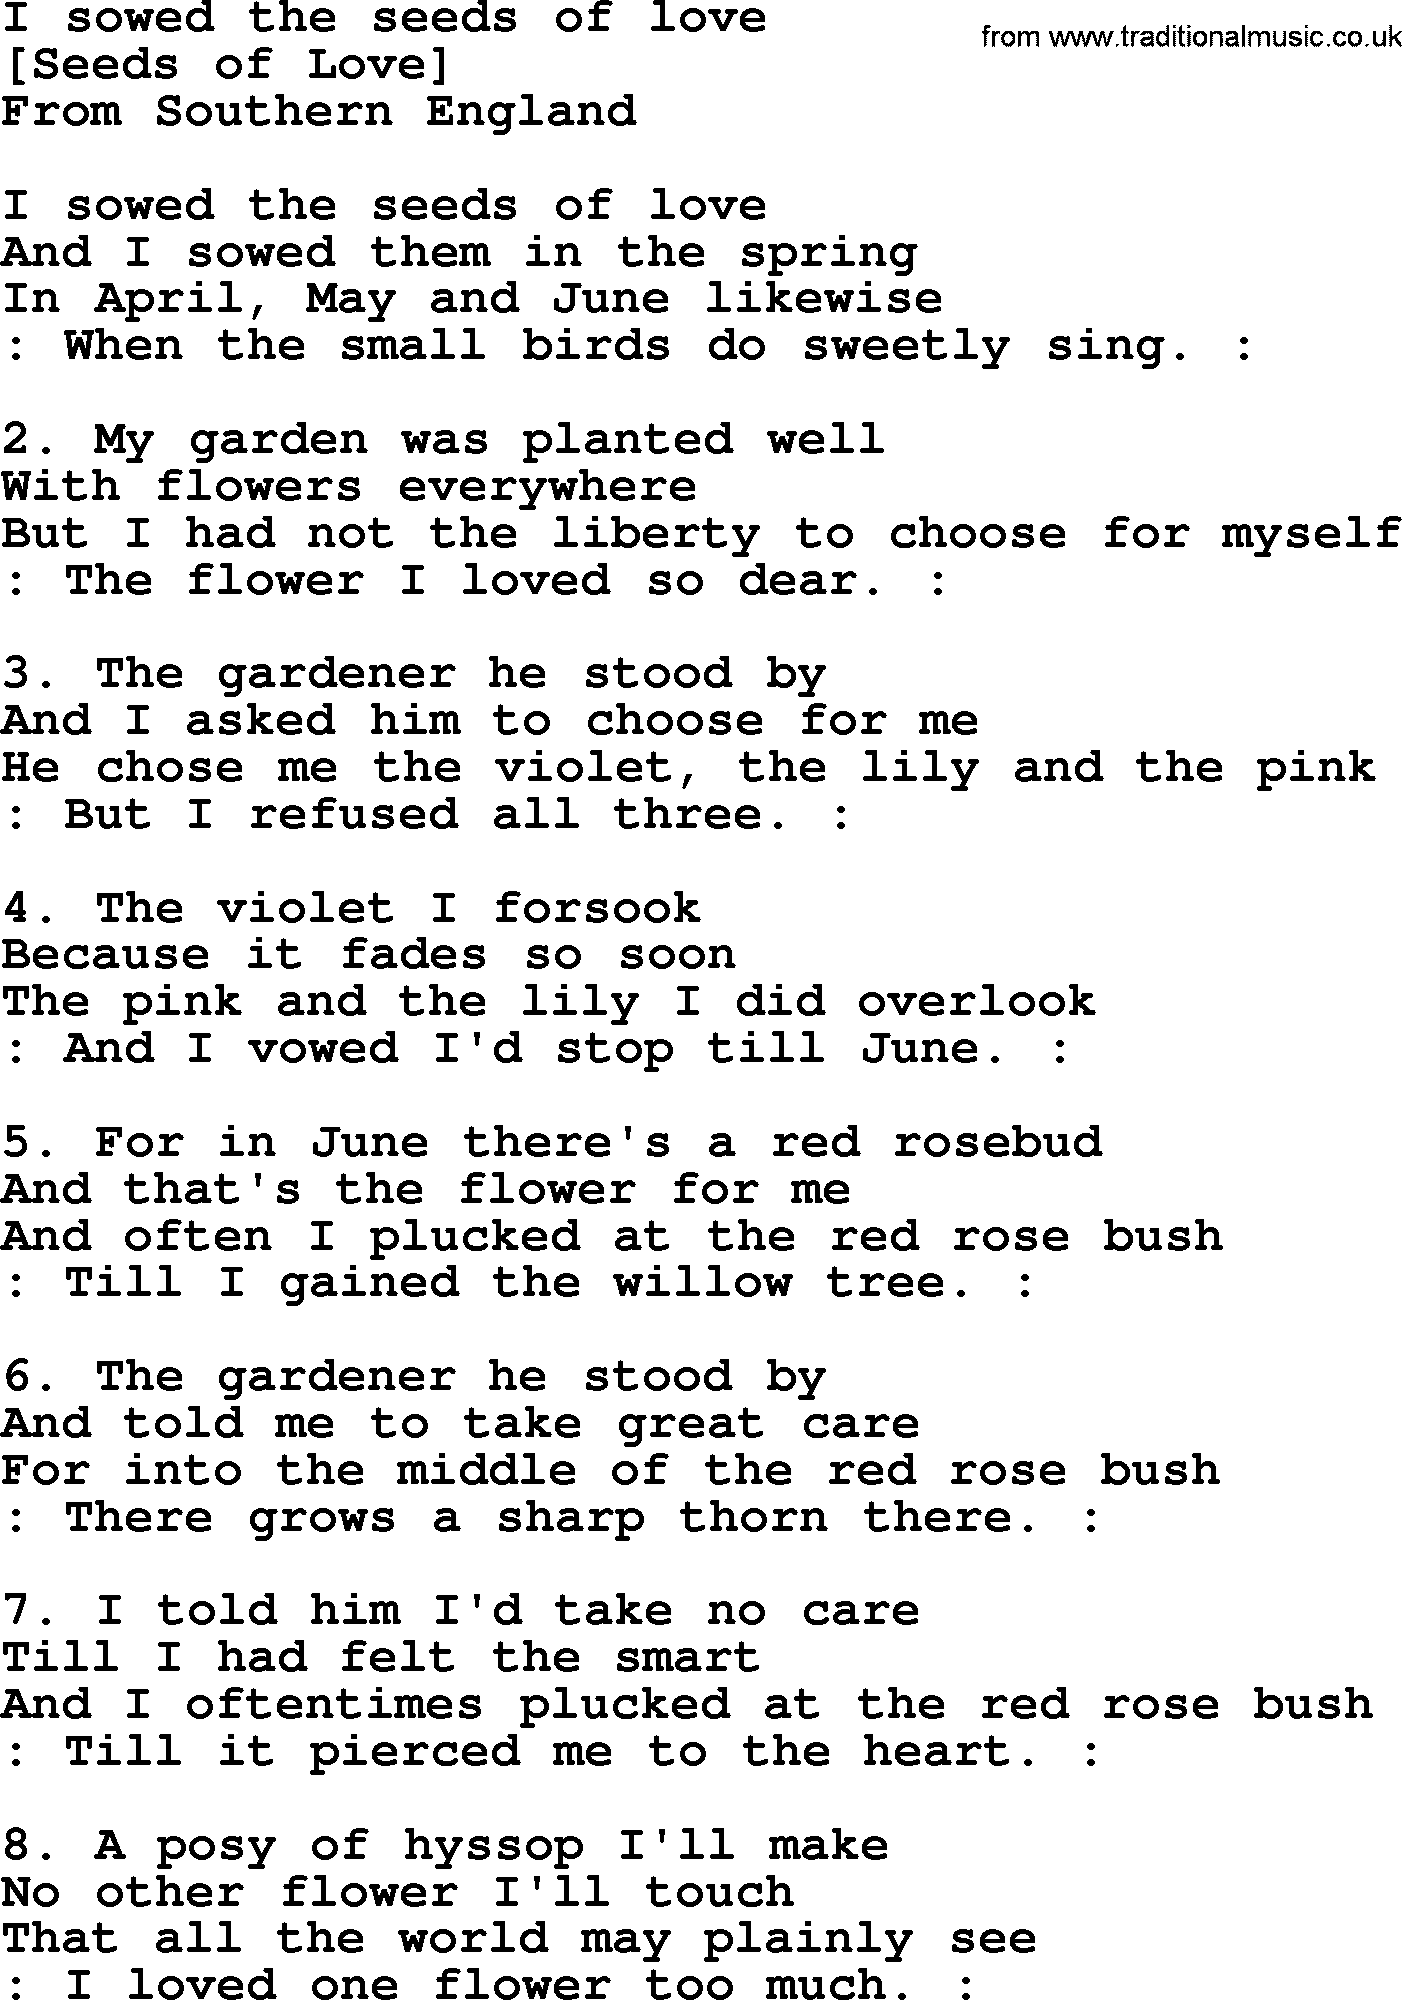 Old English Song: I Sowed The Seeds Of Love lyrics